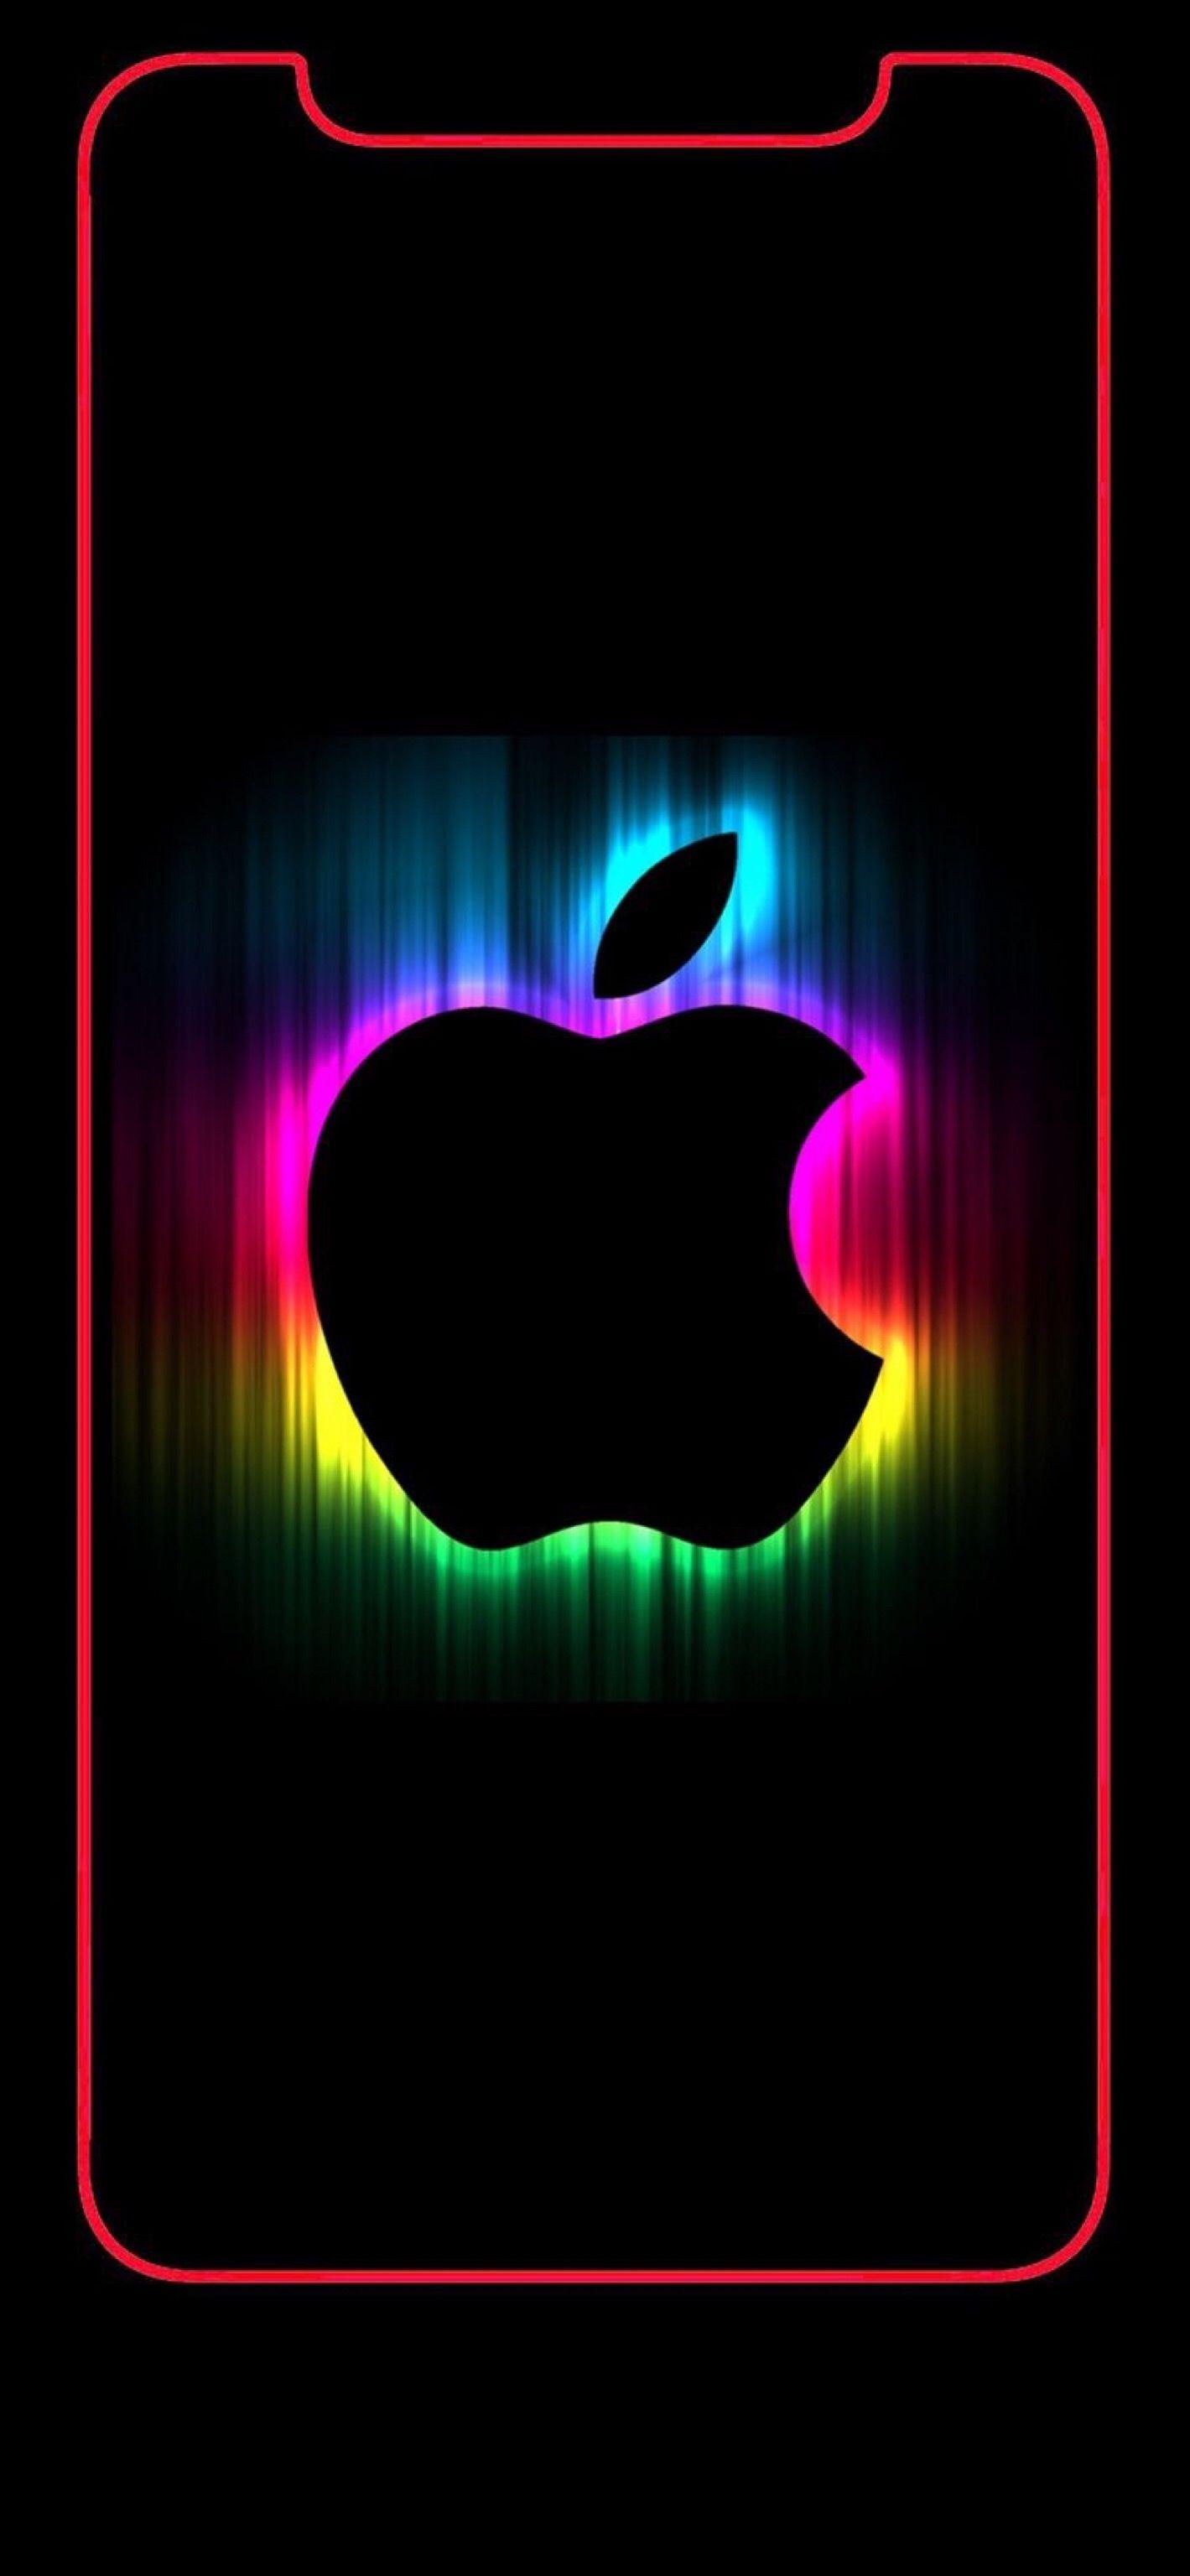 Iphone X Apple Wallpapers Wallpaper Cave